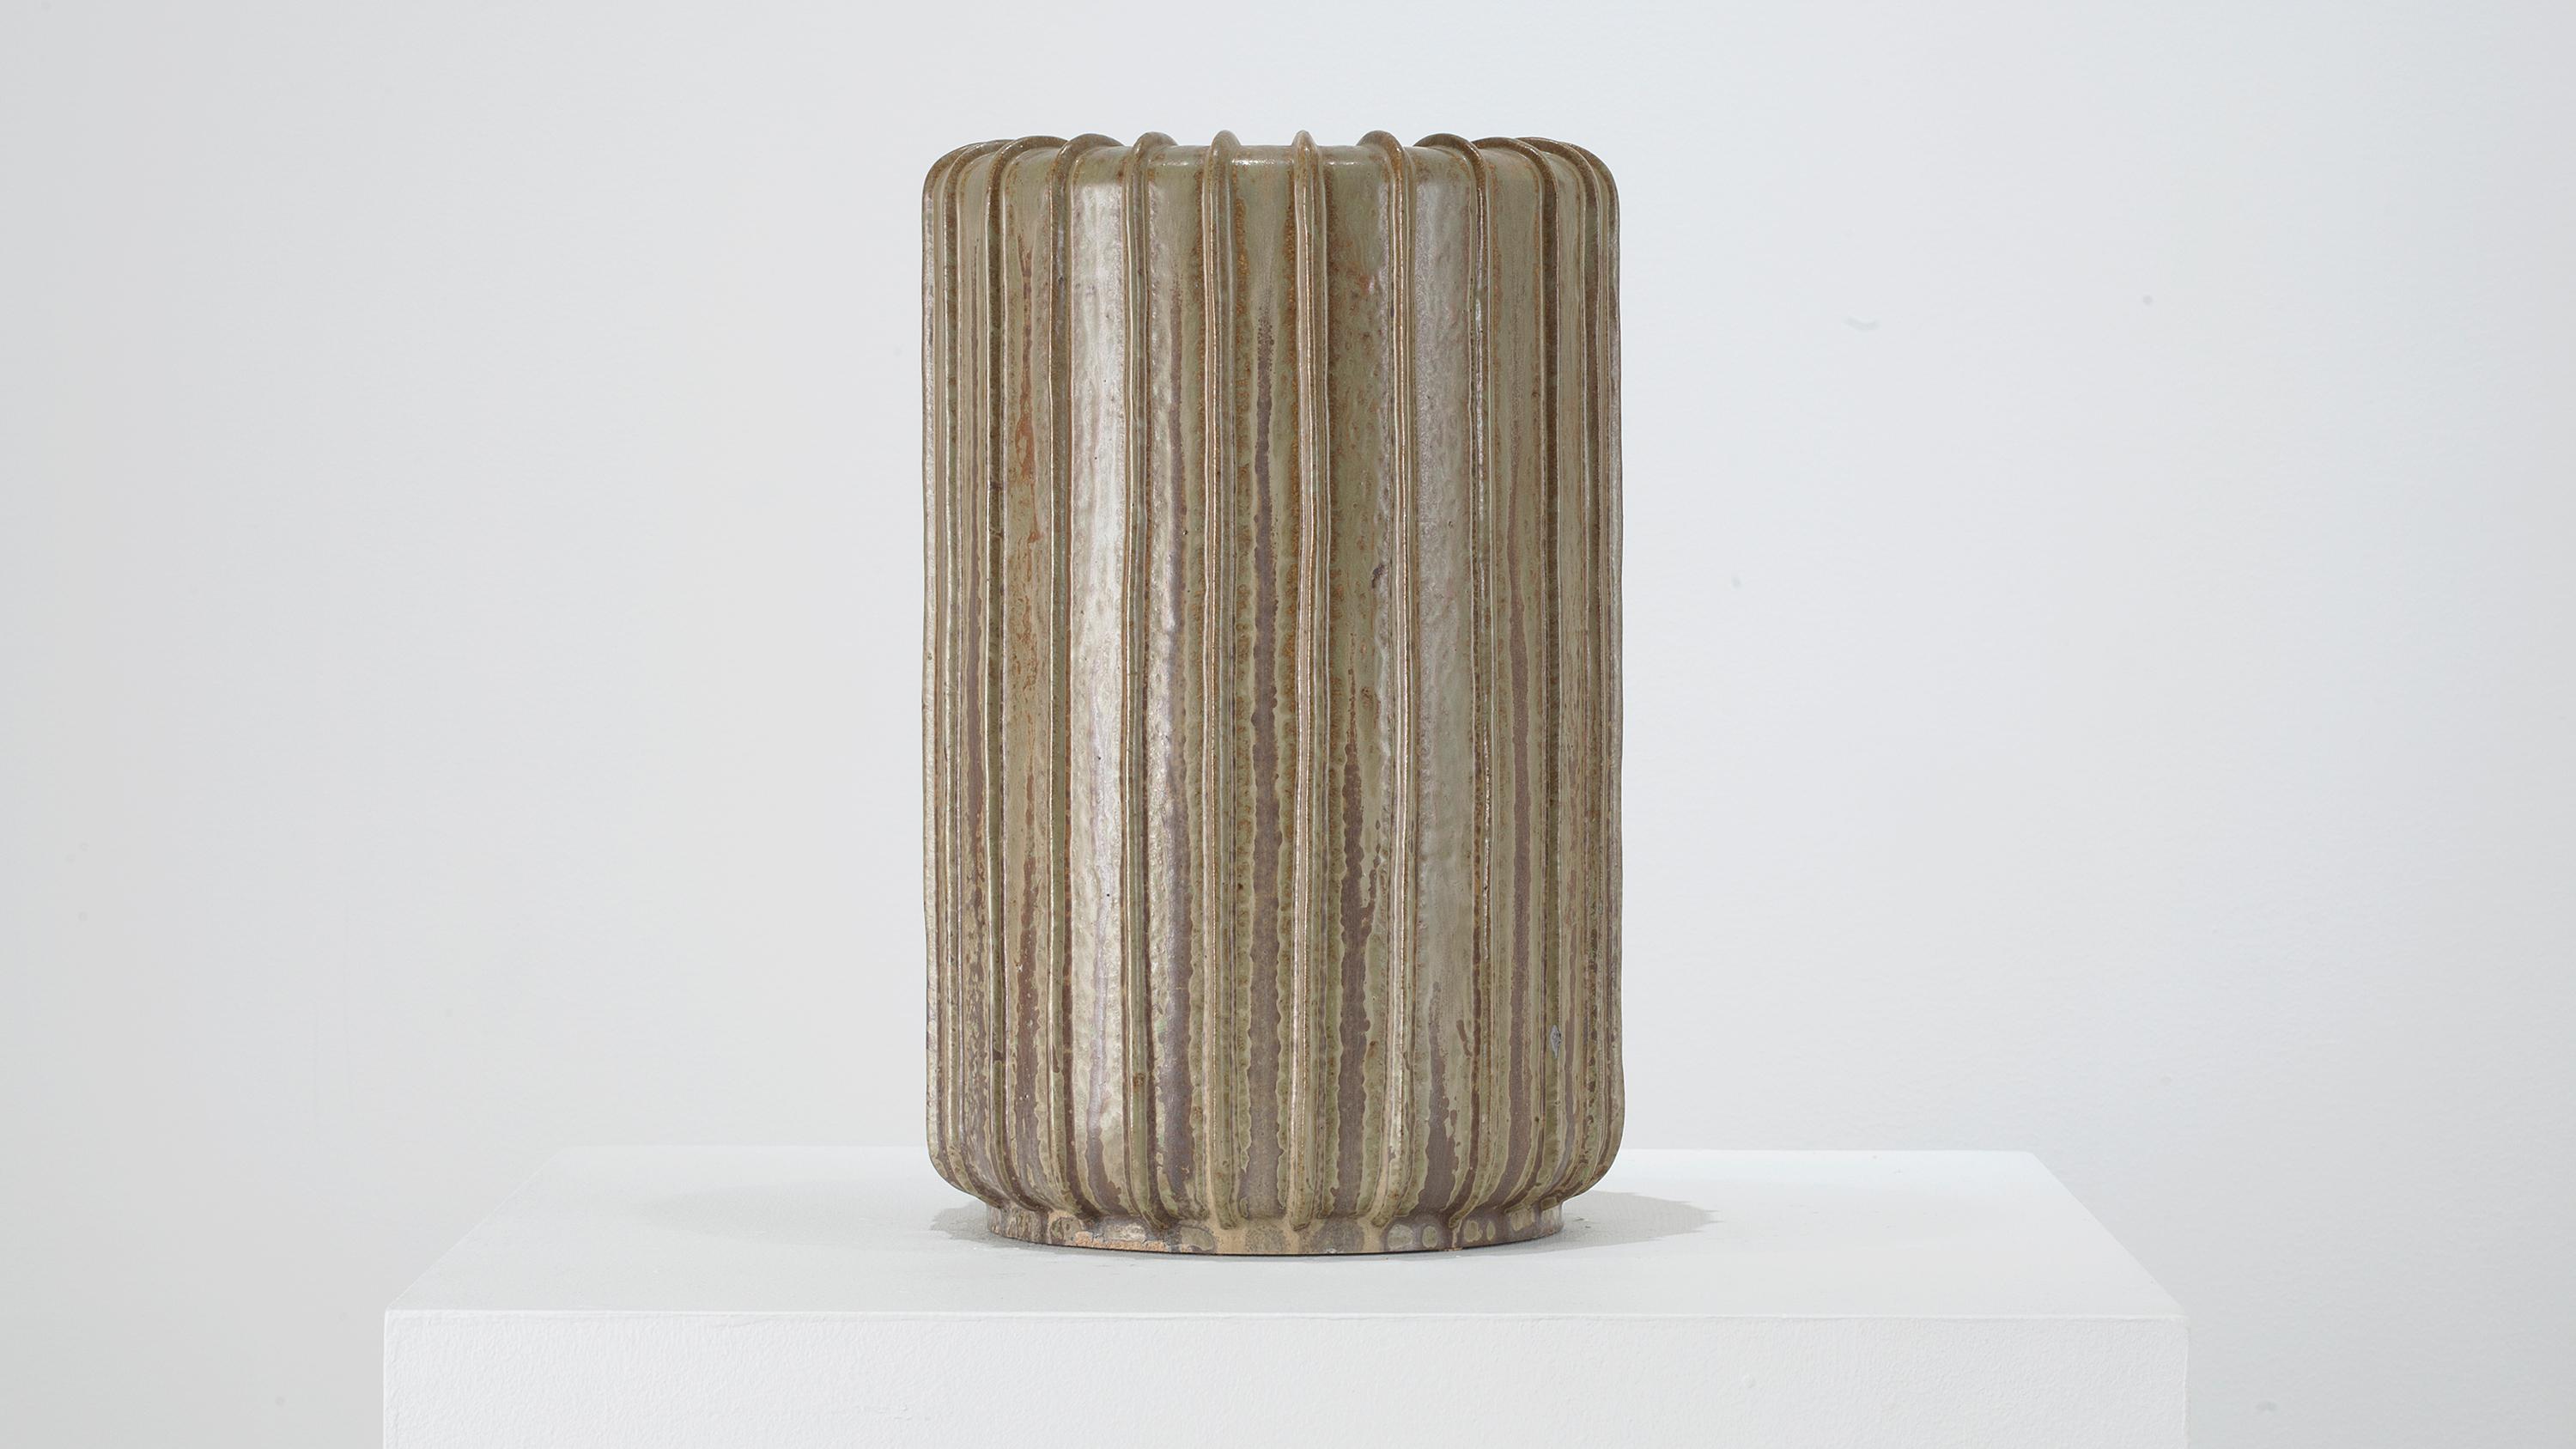 Beautiful tall ribbed vase by Arne Bang, Denmark, circa 1950. In excellent vintage condition. 

Arne Bang (Danish, 1901-1983)
Tall ribbed stoneware vase, Denmark, circa 1950
Stoneware
Measures: 15.5